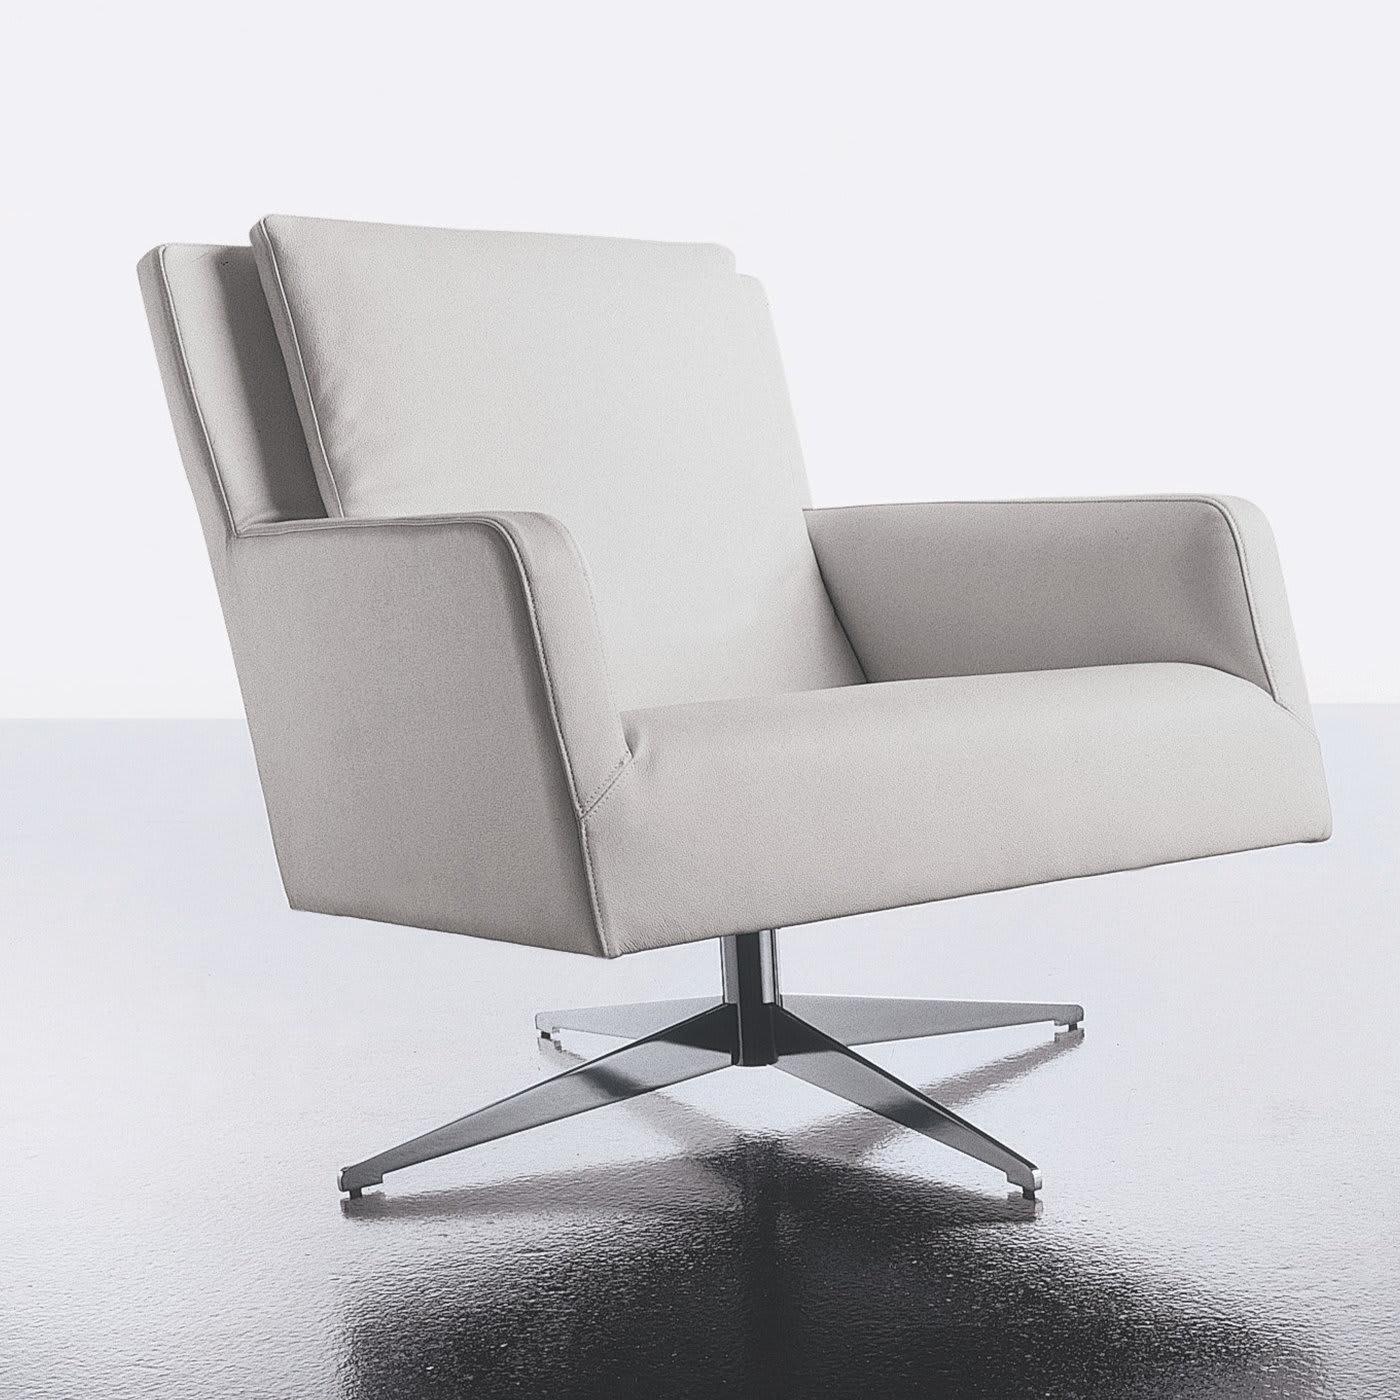 This swivel lounge armchair sits atop a four-spoked, stainless steel base. Its structure is made out of beech plywood, while white, genuine leather covers its padded seat and back. The wide, roomy design of this chair ensures maximum comfort. It is